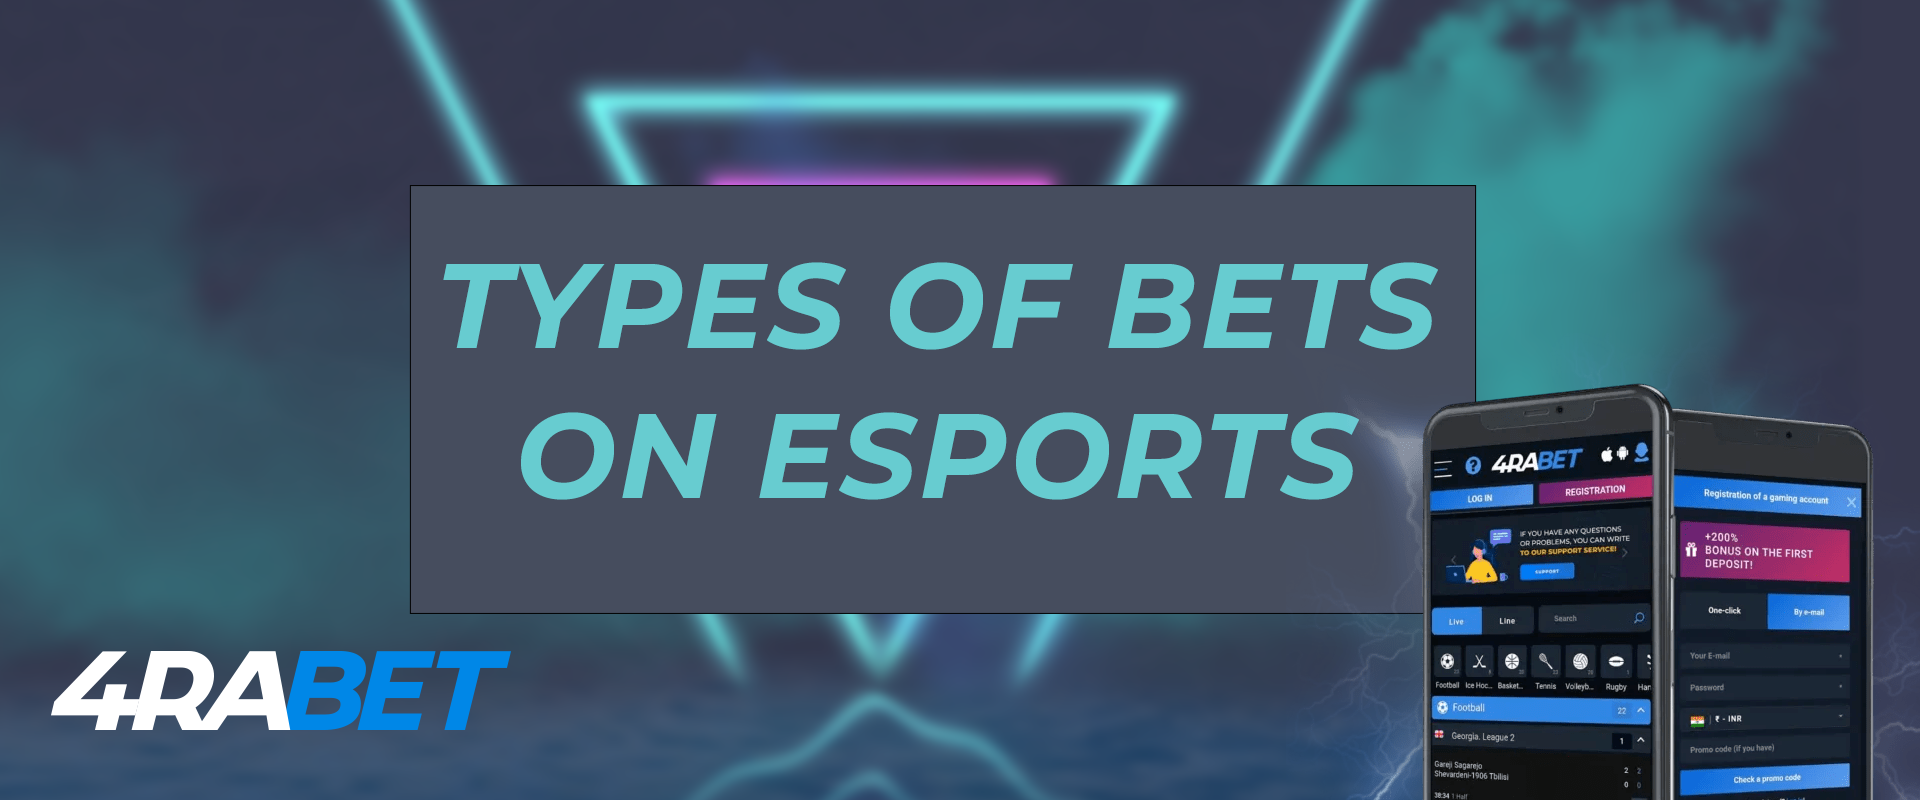 All types of bets on esport.